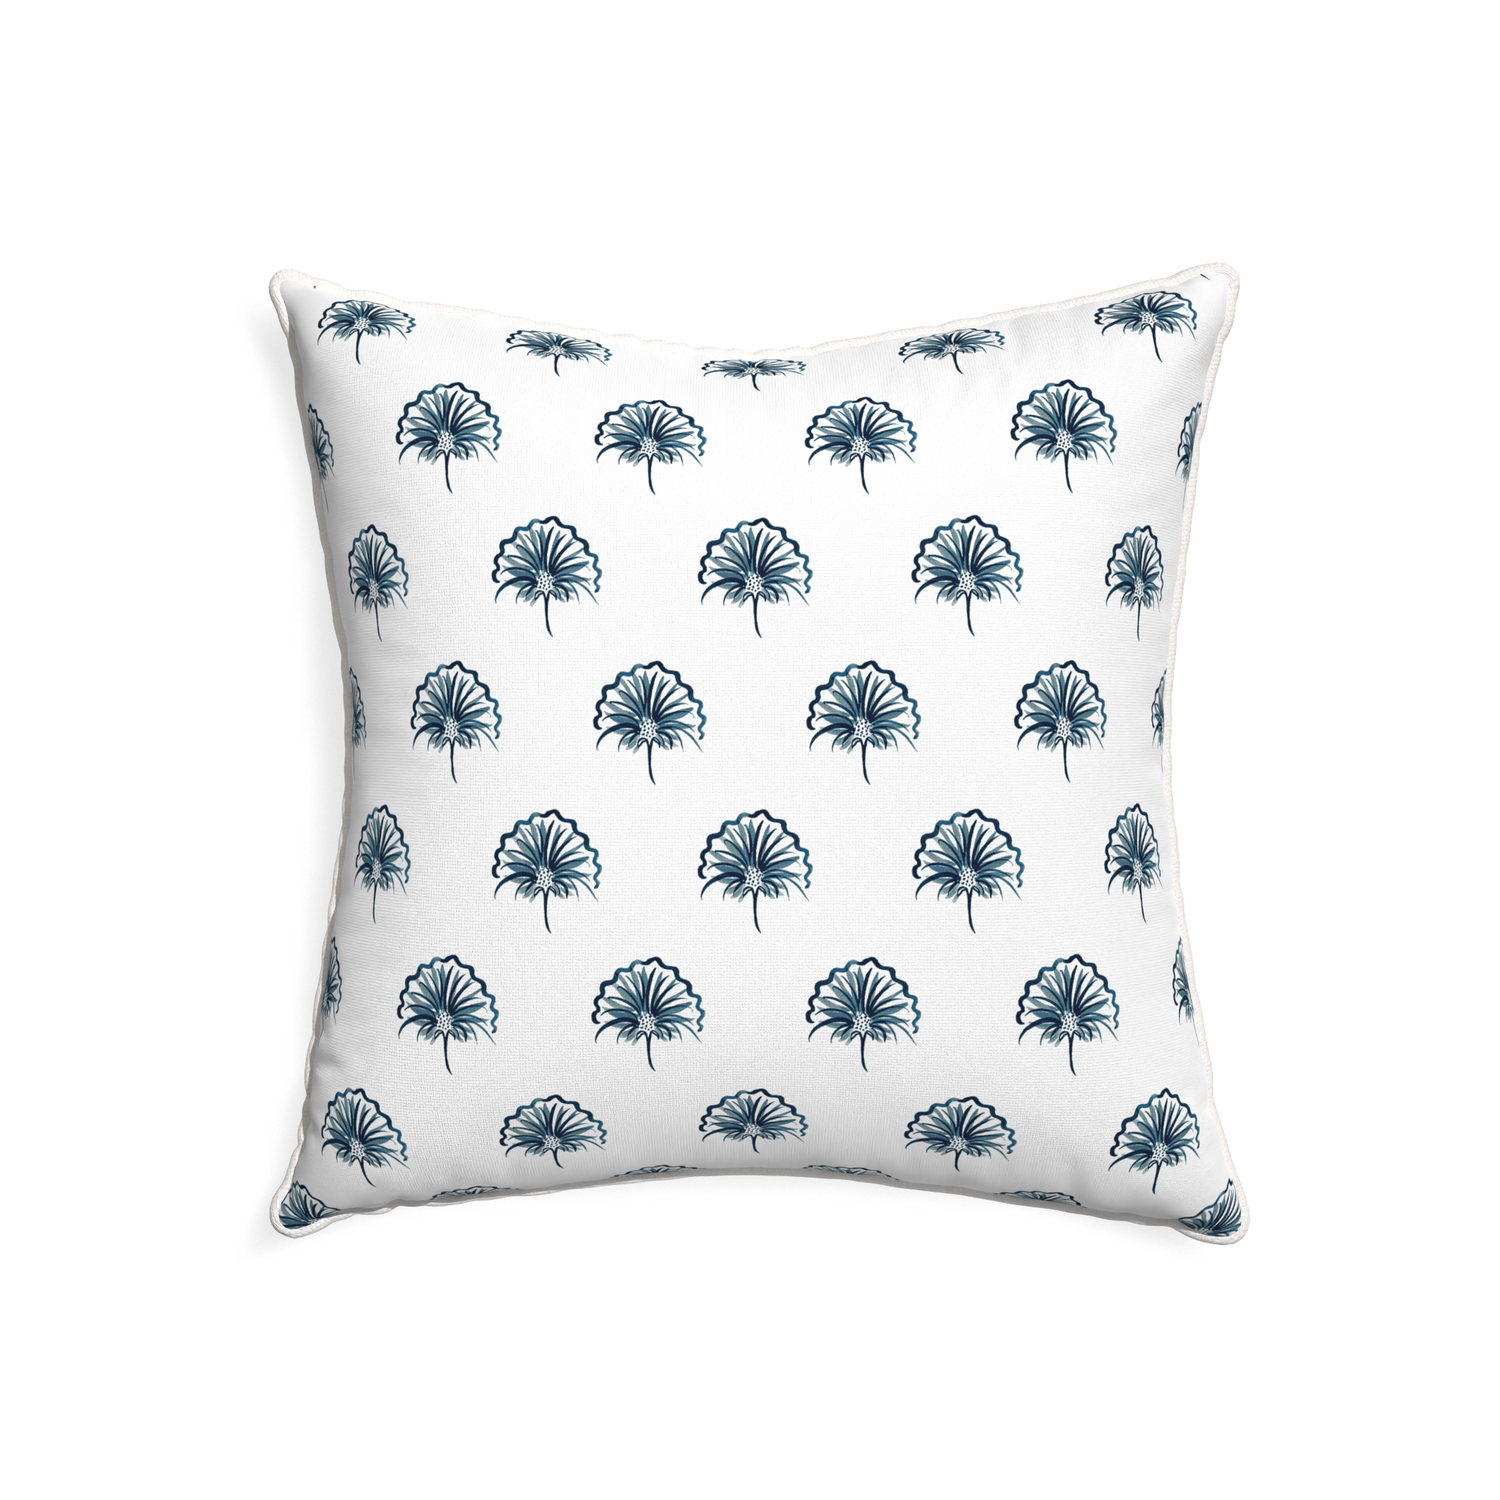 22-square penelope midnight custom floral navypillow with snow piping on white background